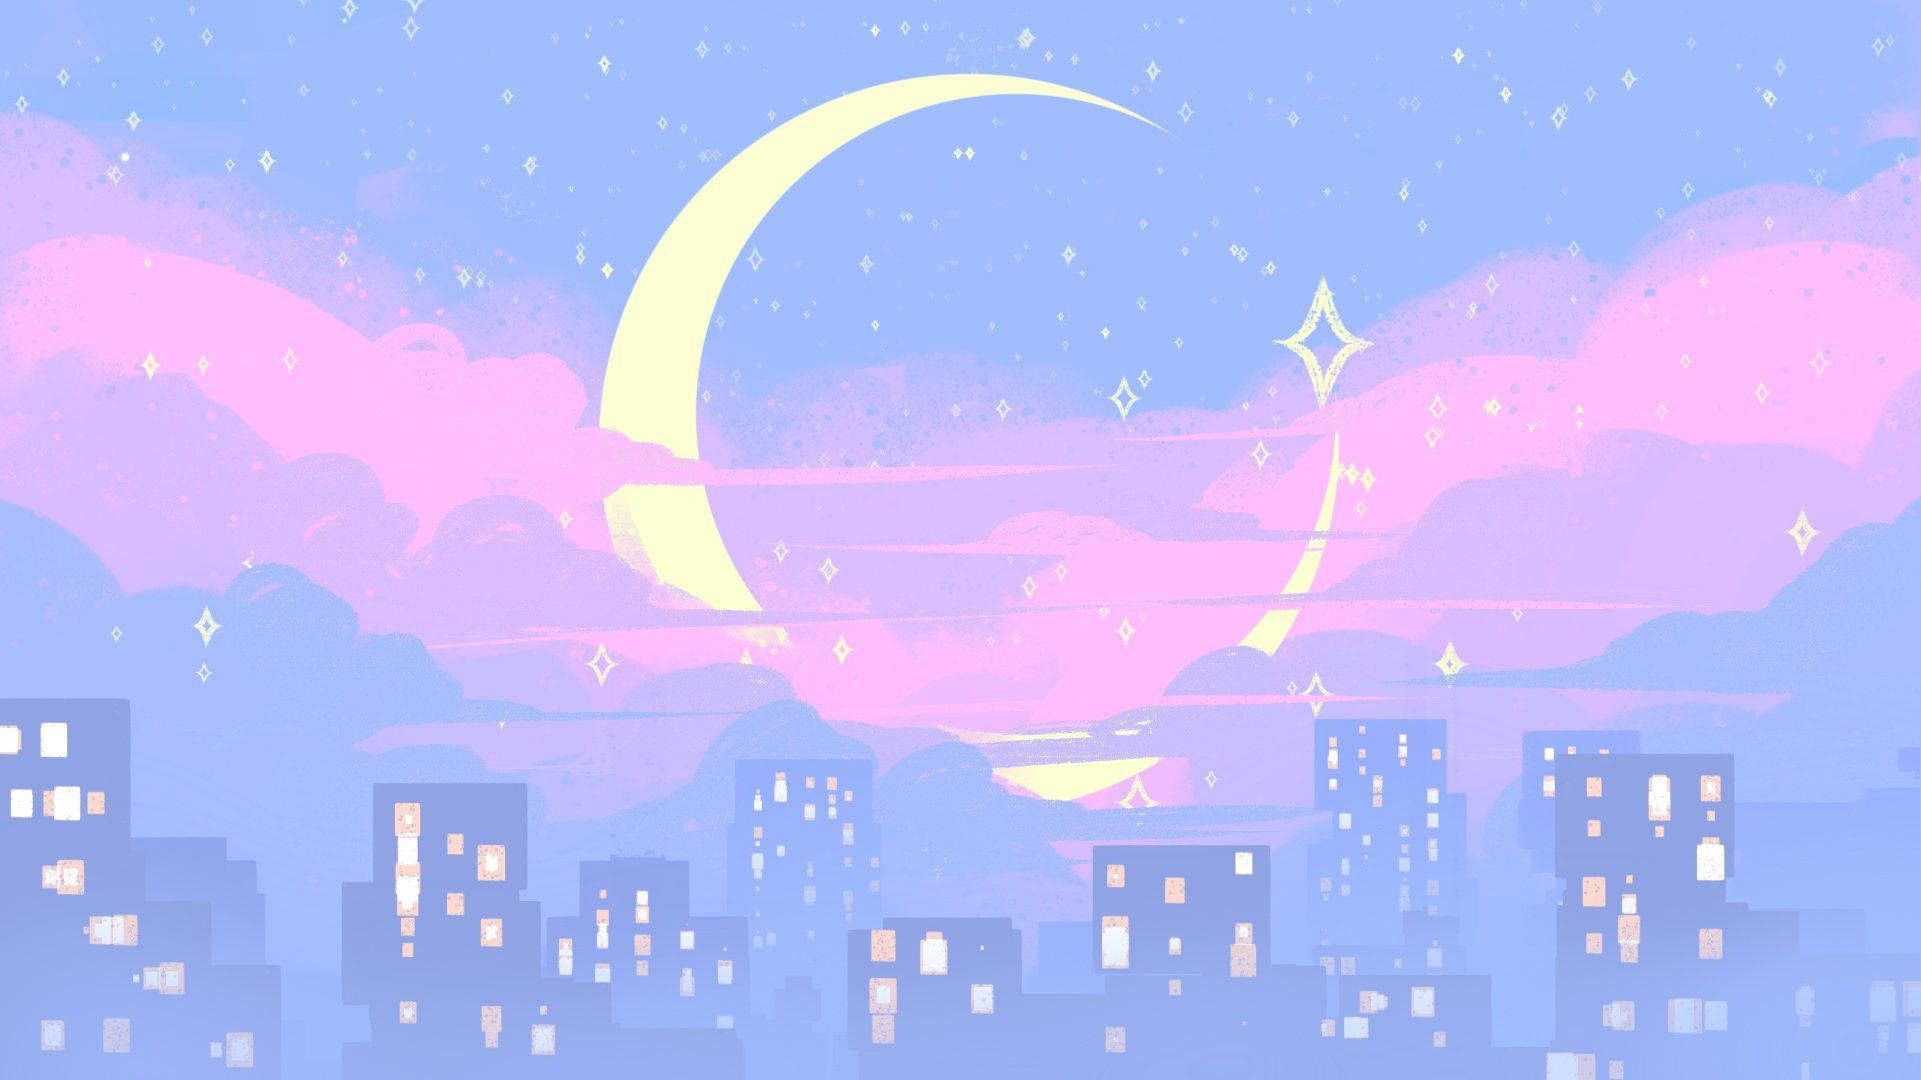 A city skyline with the moon in it - Sailor Moon, landscape